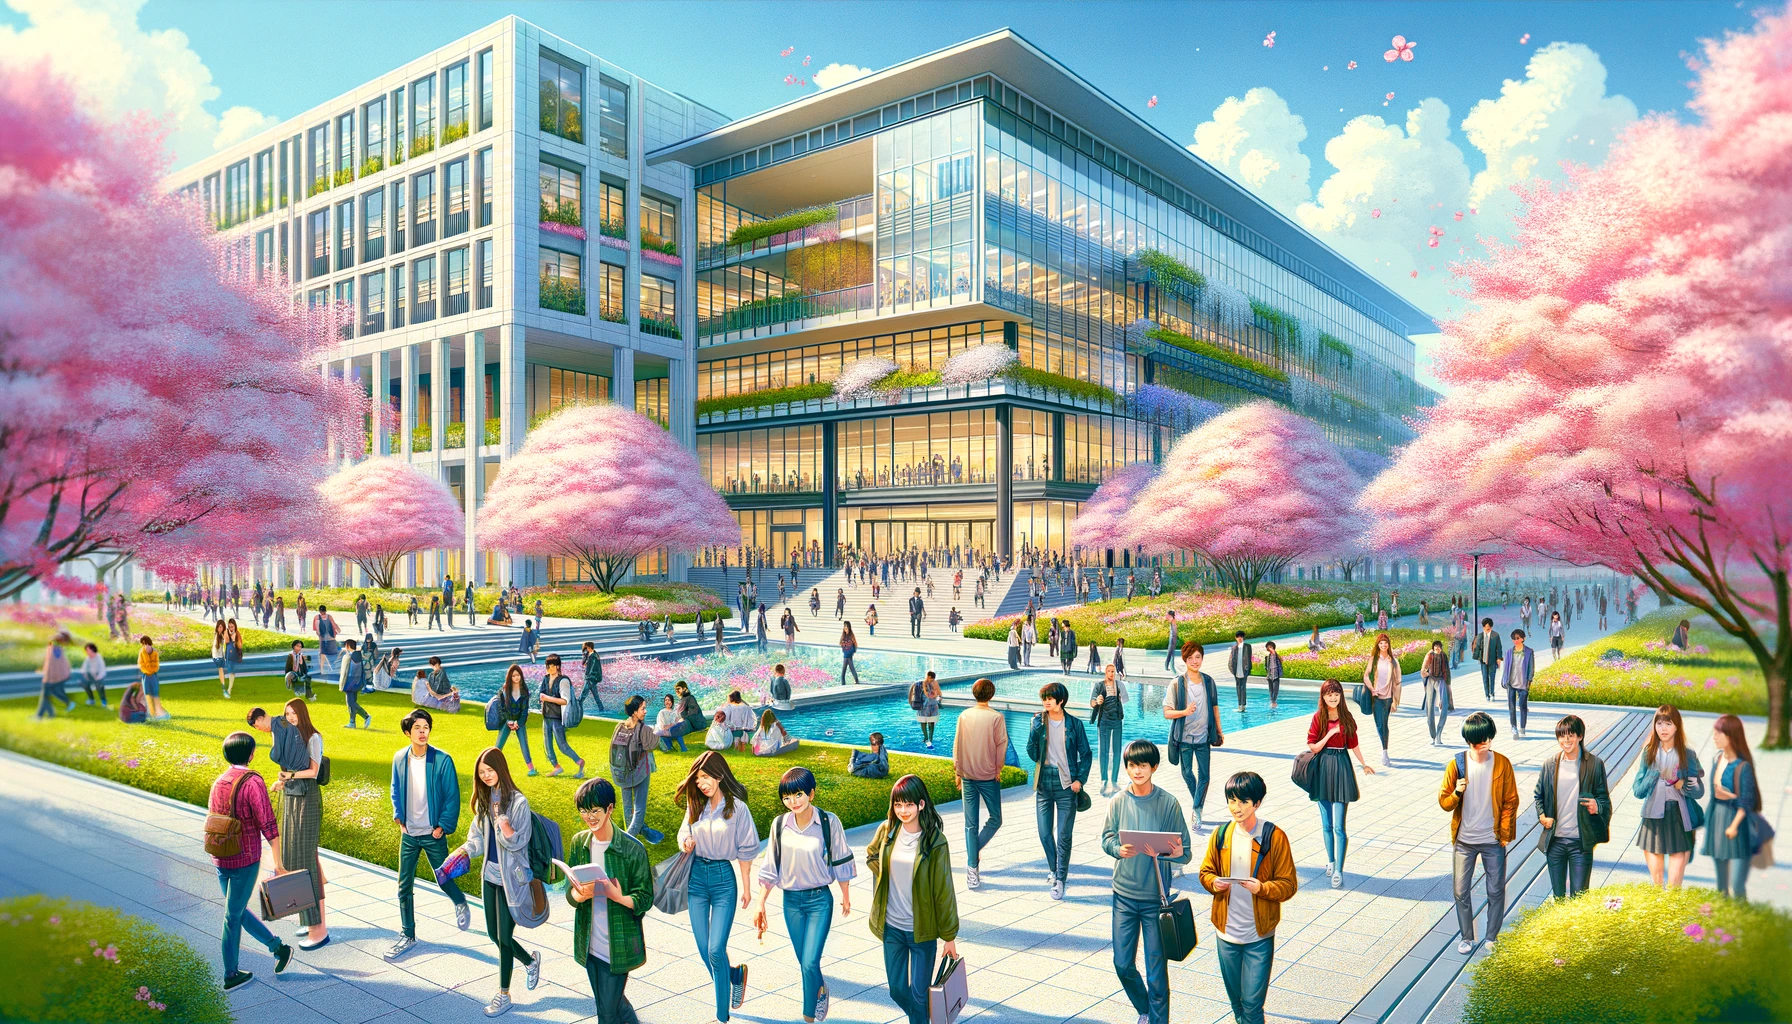 A vibrant university campus scene depicting the popularity of Chiba University in Japan. The image features a large group of diverse students of various Asian descents, casually dressed, walking and chatting among cherry blossoms in full bloom. The university's modern architecture, with sleek glass buildings and landscaped gardens, is visible in the background. The scene is lively, with students engaging in outdoor activities like reading, using laptops, and group discussions, showcasing a bustling academic environment.